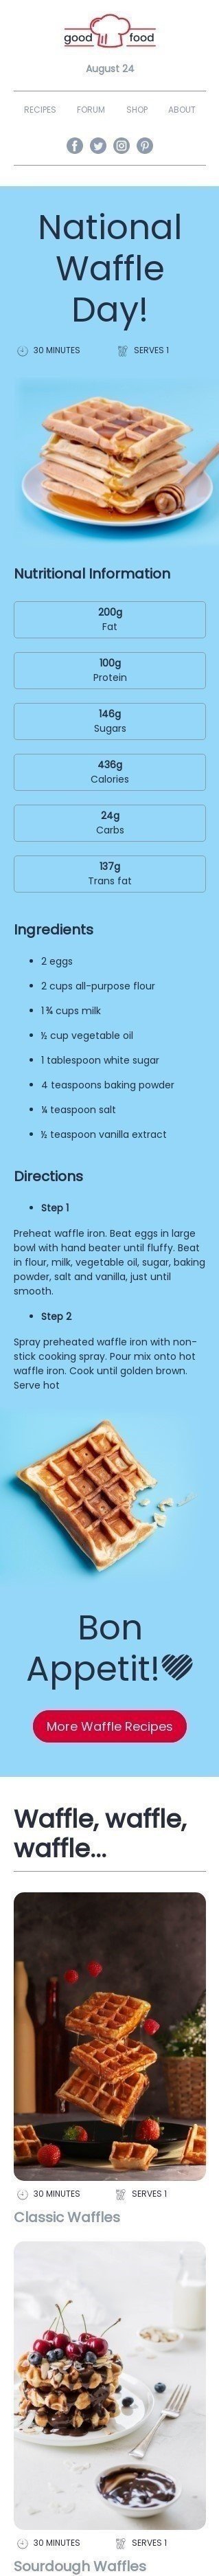 National Waffle Day Email Template "Share your waffle recipe" for Food industry mobile view